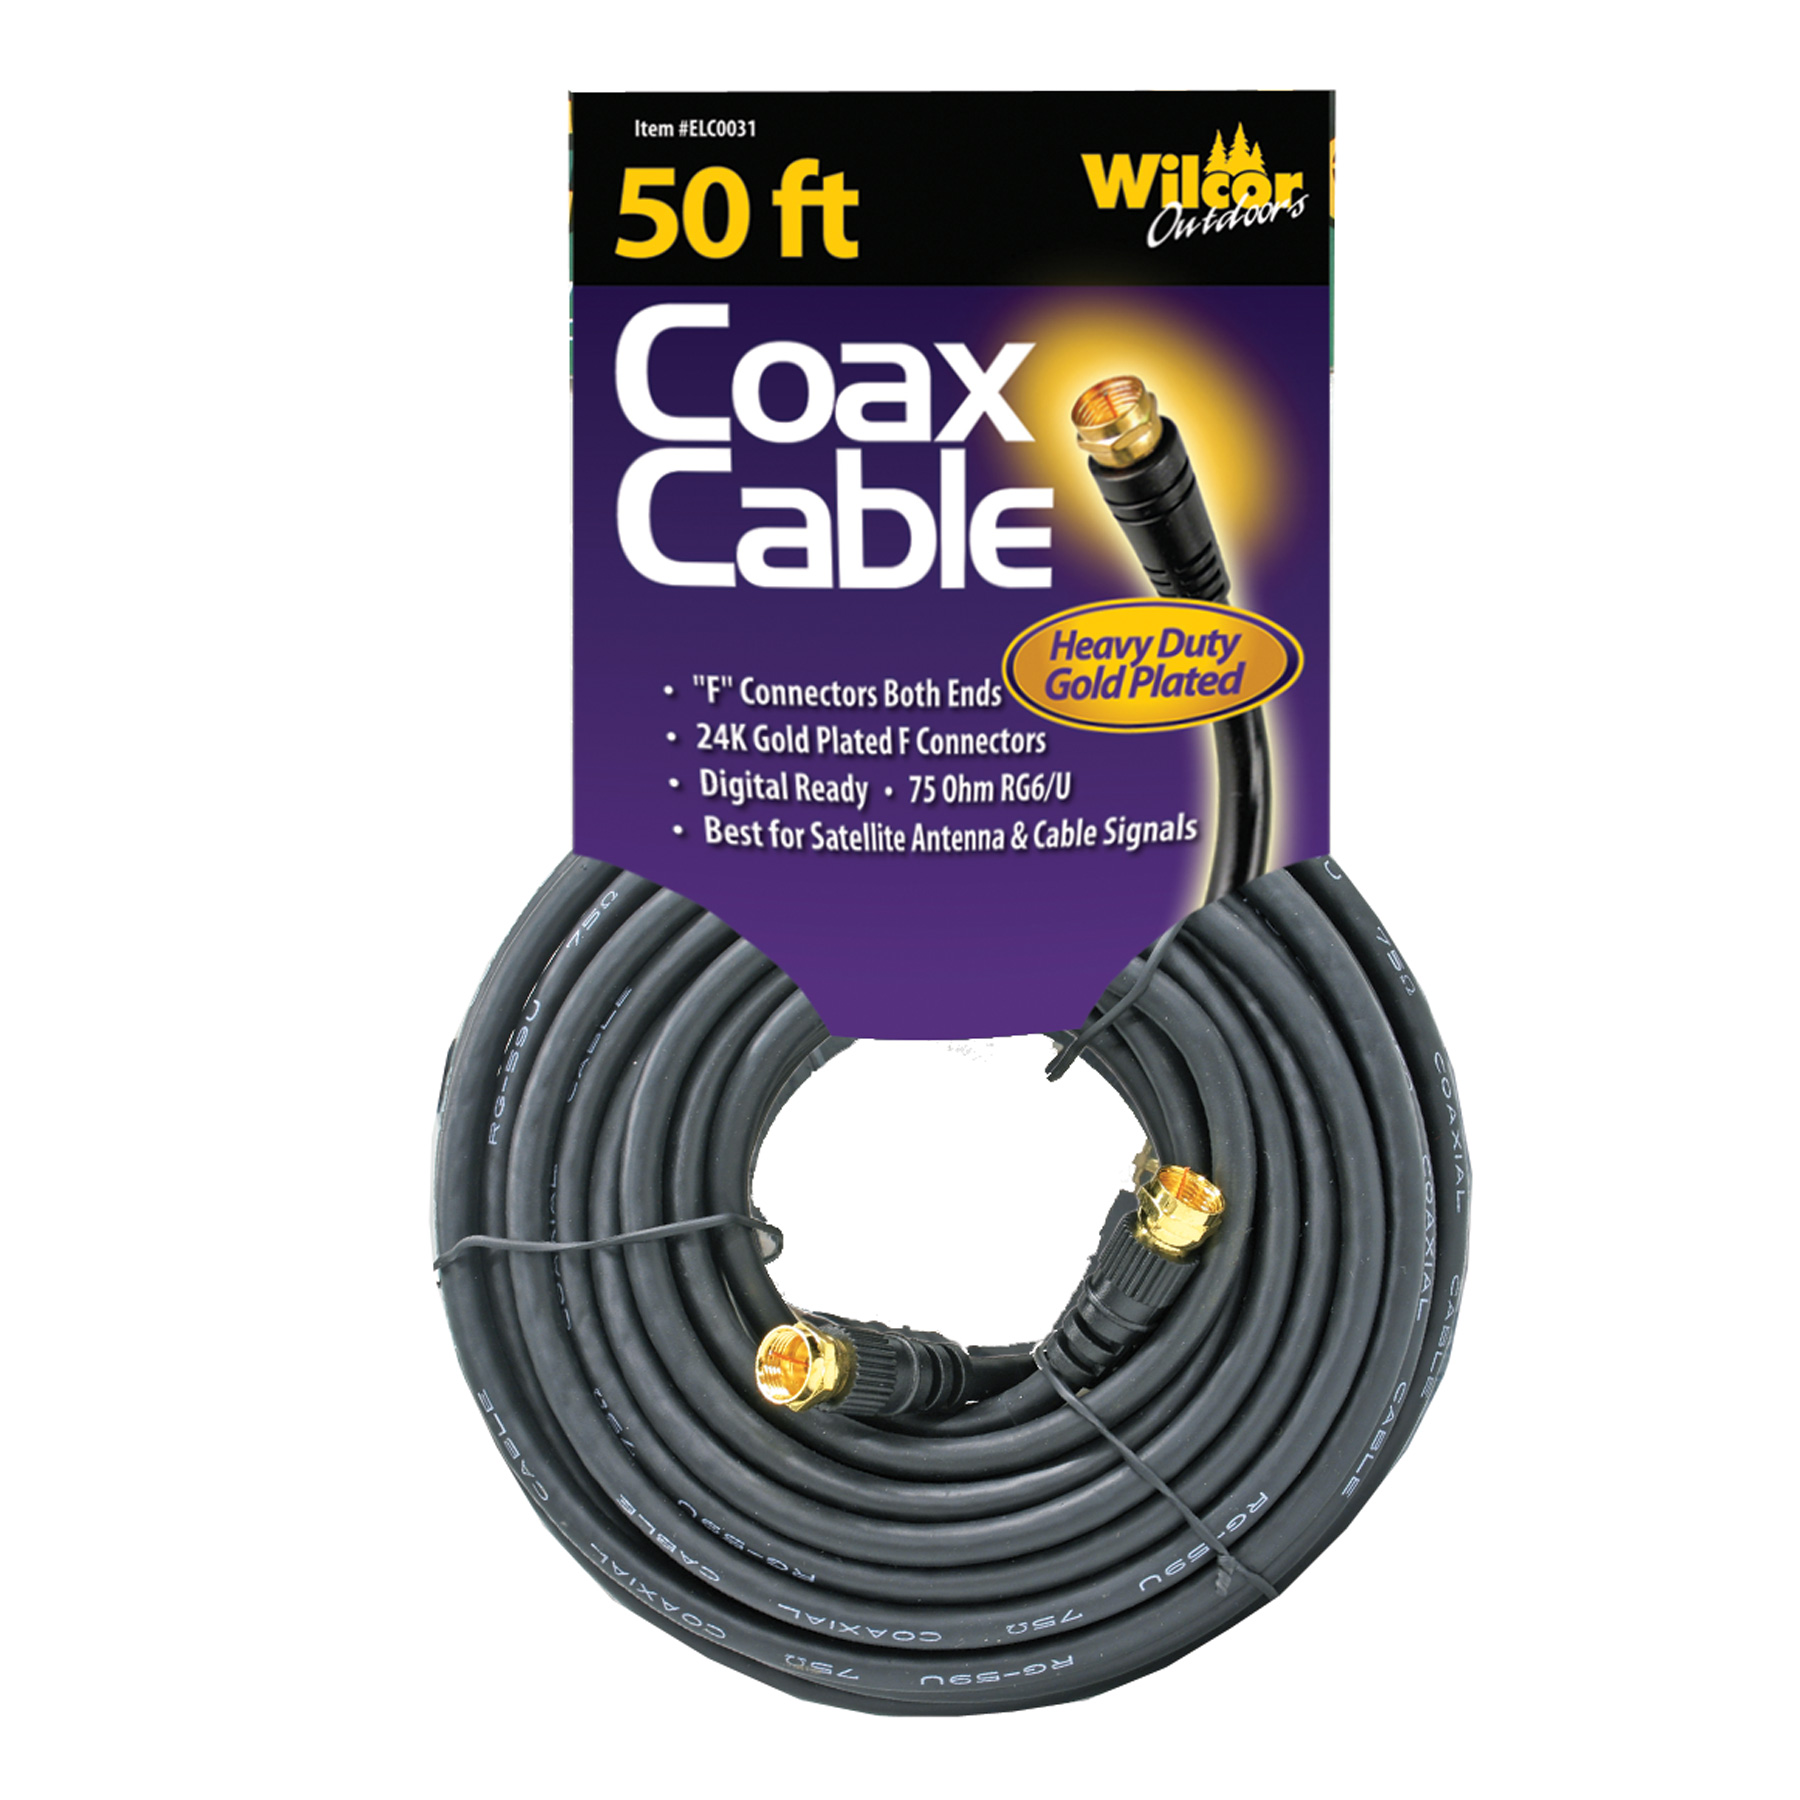 {0} COAX CABLE 50';sellelc0031a